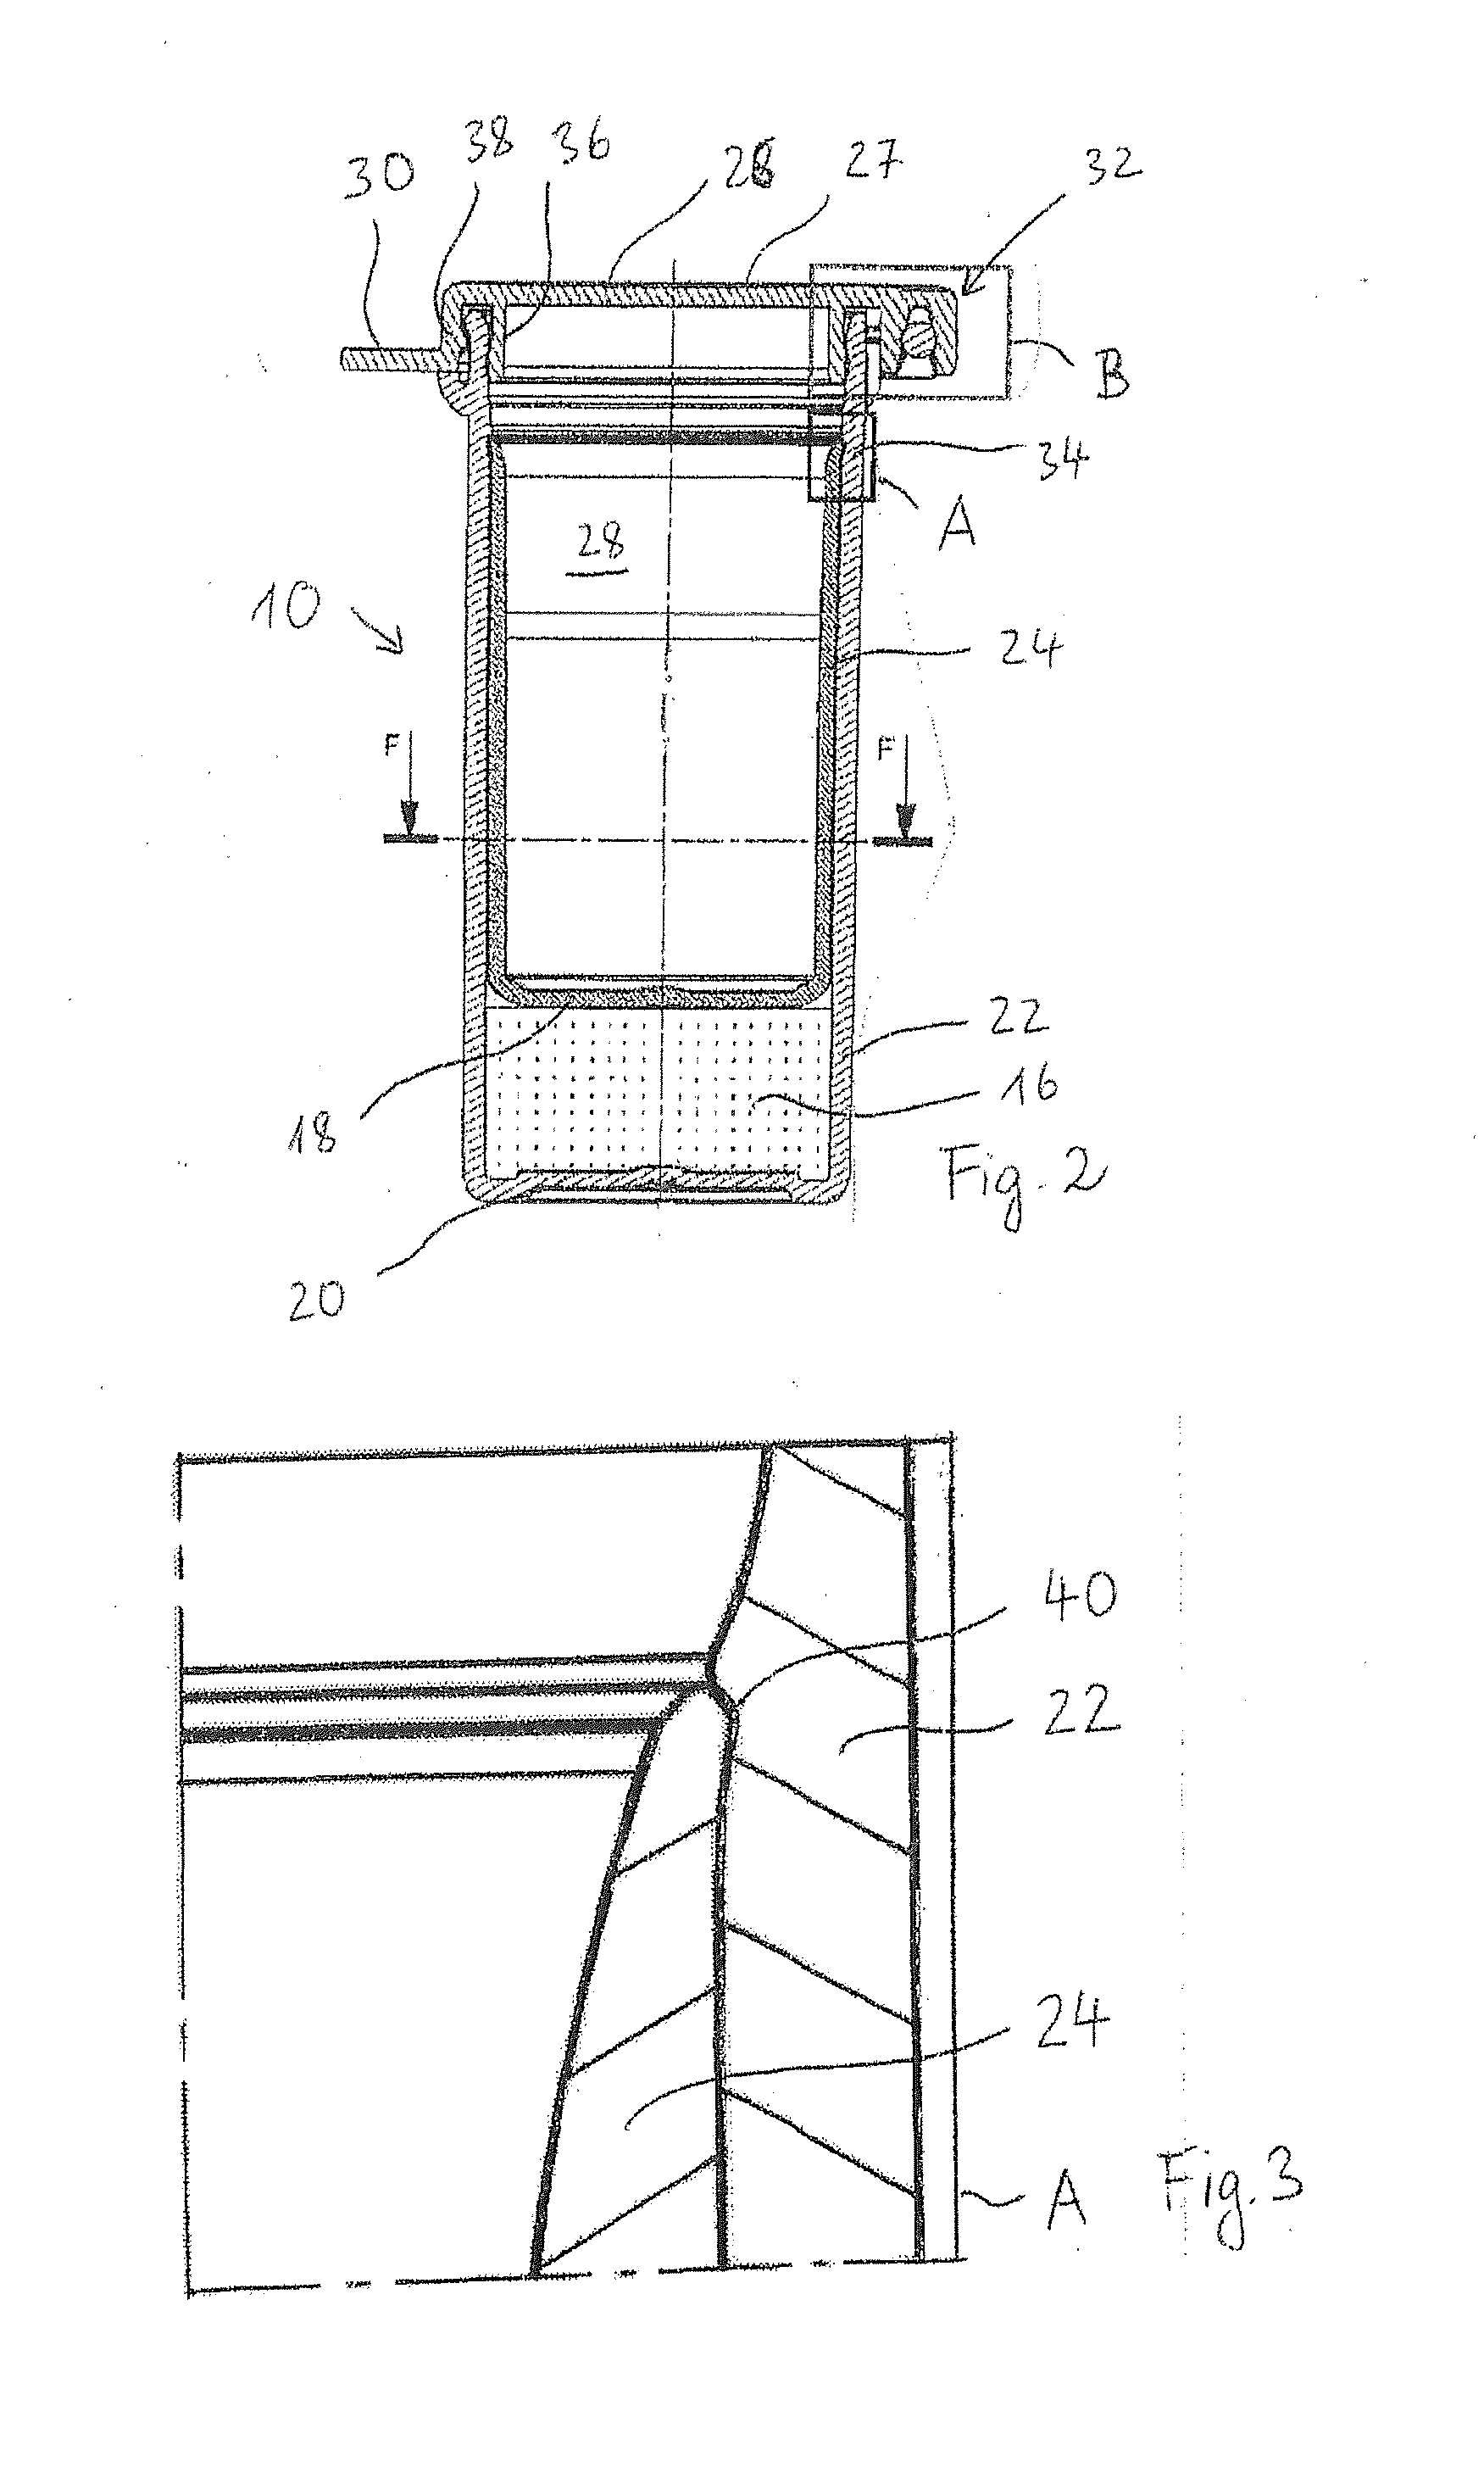 Container for receiving moisture sensitive goods